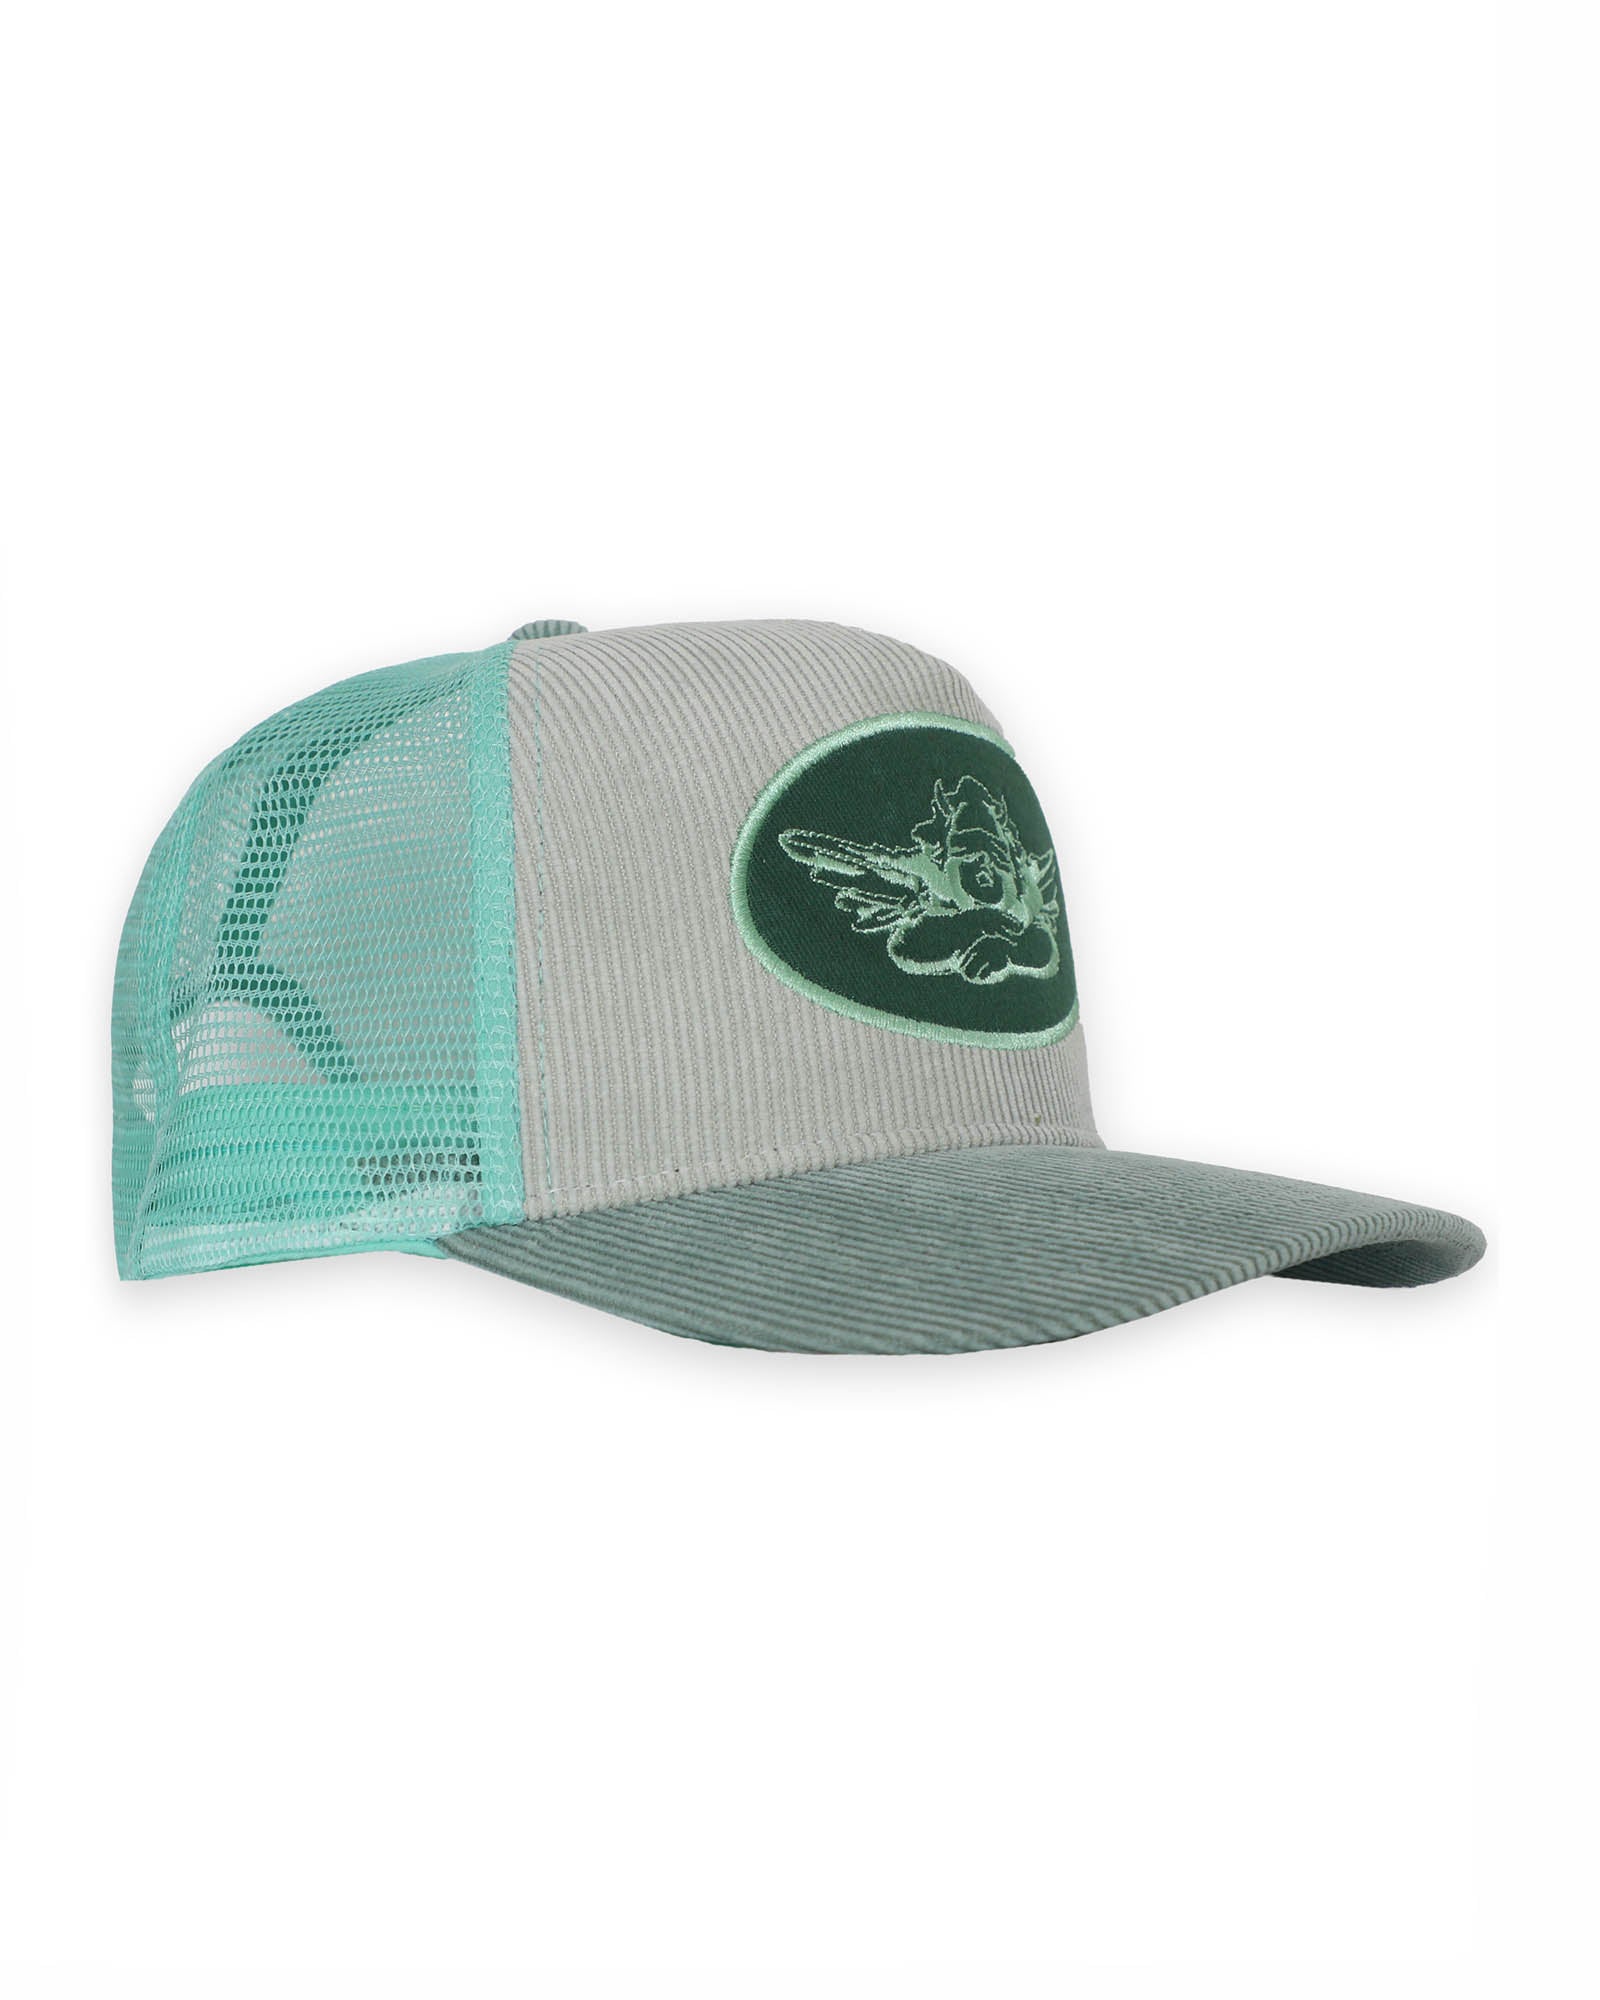 Boys Lie | Pacific Corduroy Trucker Hat - Oso Blue | Be EMPowered